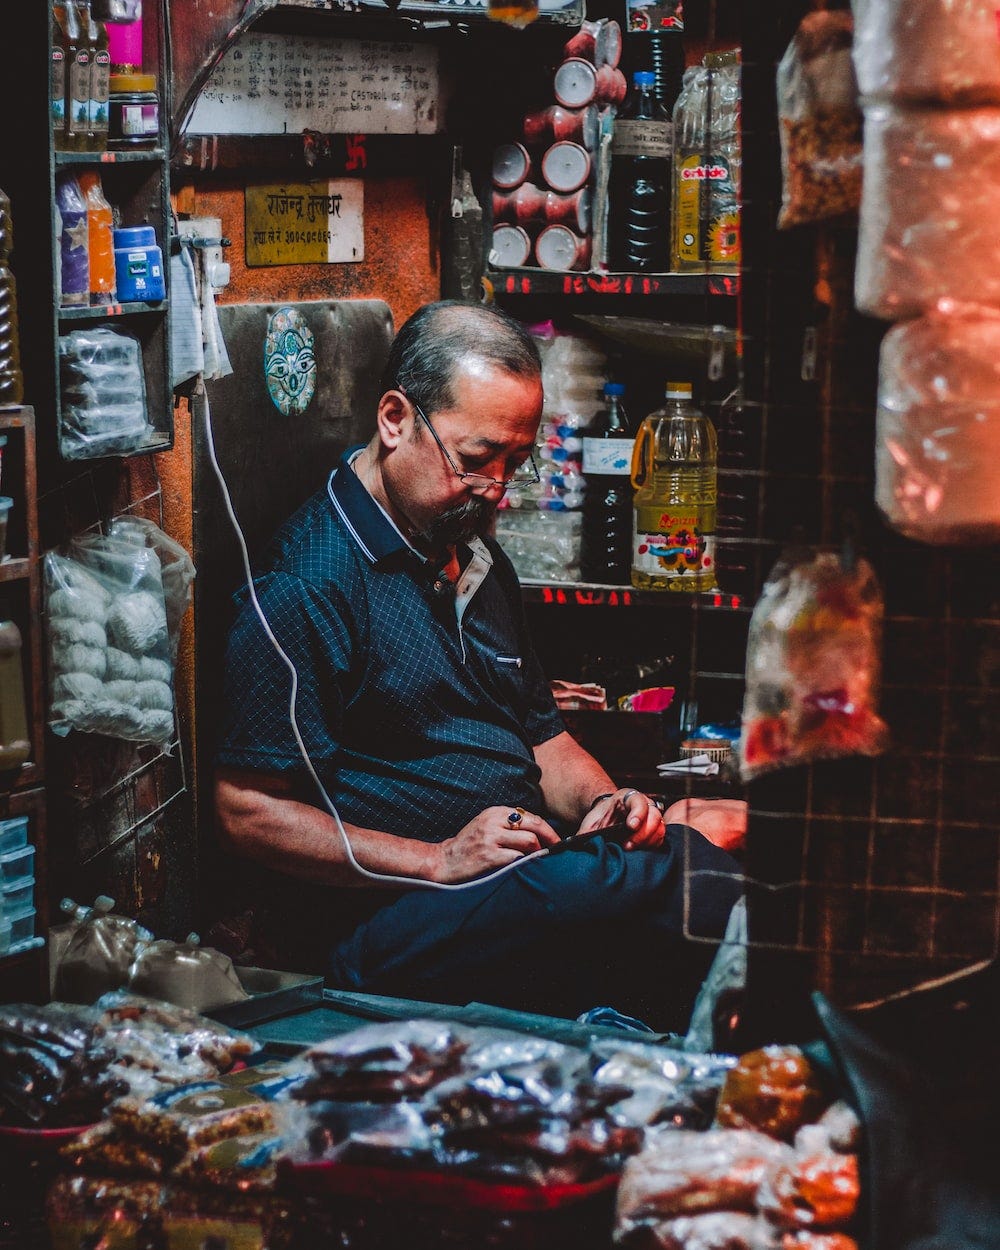 A shopkeeper browsing dumbly through his phone.